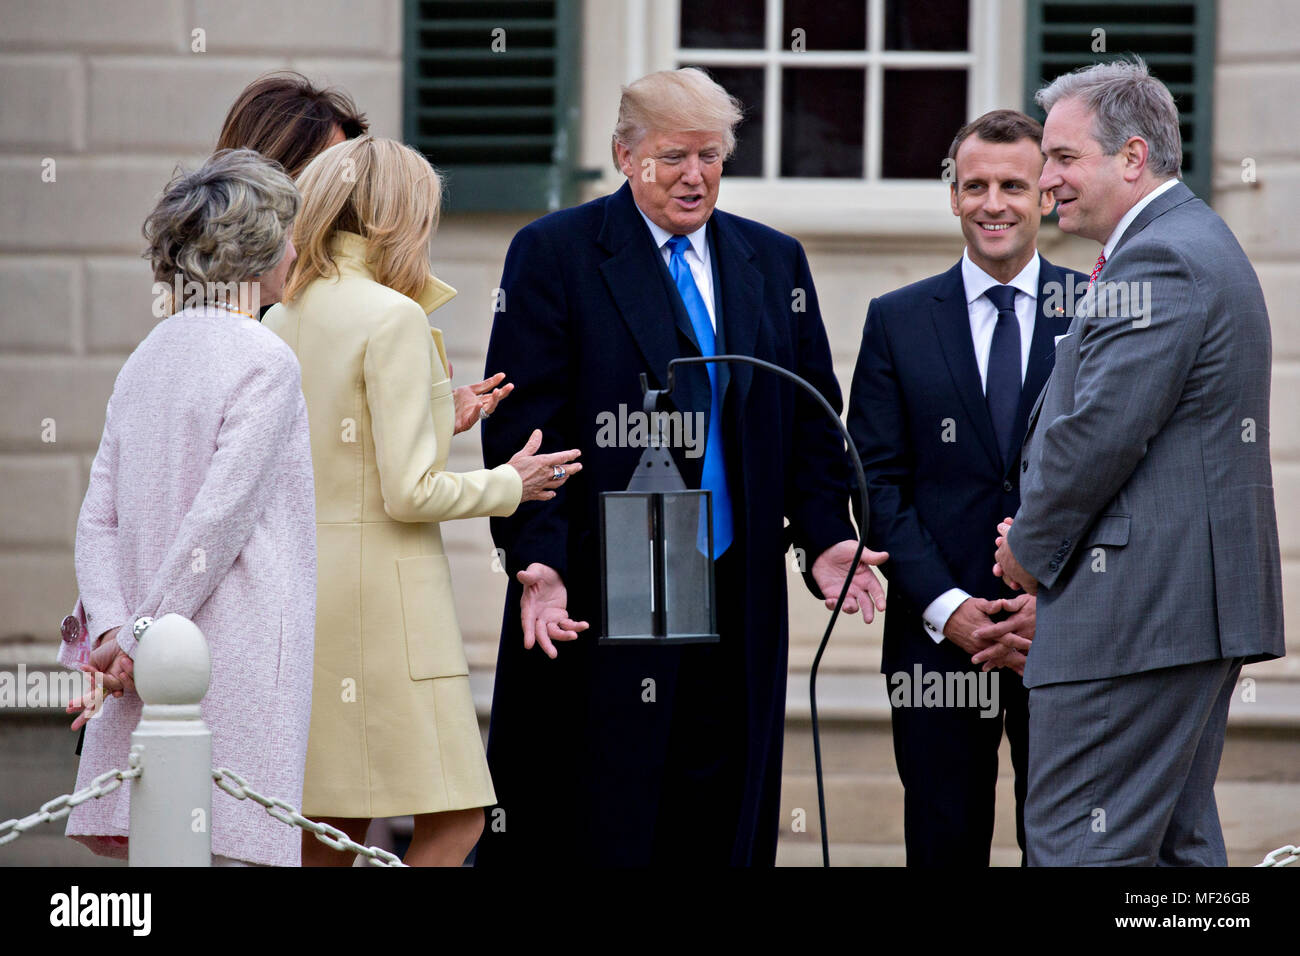 U.S. President Donald Trump, center, speaks as Doug Bradburn, president and chief executive officer of George Washington's Mount Vernon, from right, Emmanuel Macron, France's president, Brigitte Macron, France's first lady, U.S. First Lady Melania Trump and Sarah Miller Coulson, regent with the Mount Vernon Ladies' Association, listen while touring outside the Mansion at the Mount Vernon estate of first U.S. President George Washington in Mount Vernon, Virginia, U.S., on Monday, April 23, 2018. As Macron arrives for the first state visit of Trump's presidency, the U.S. leader is threatening to Stock Photo